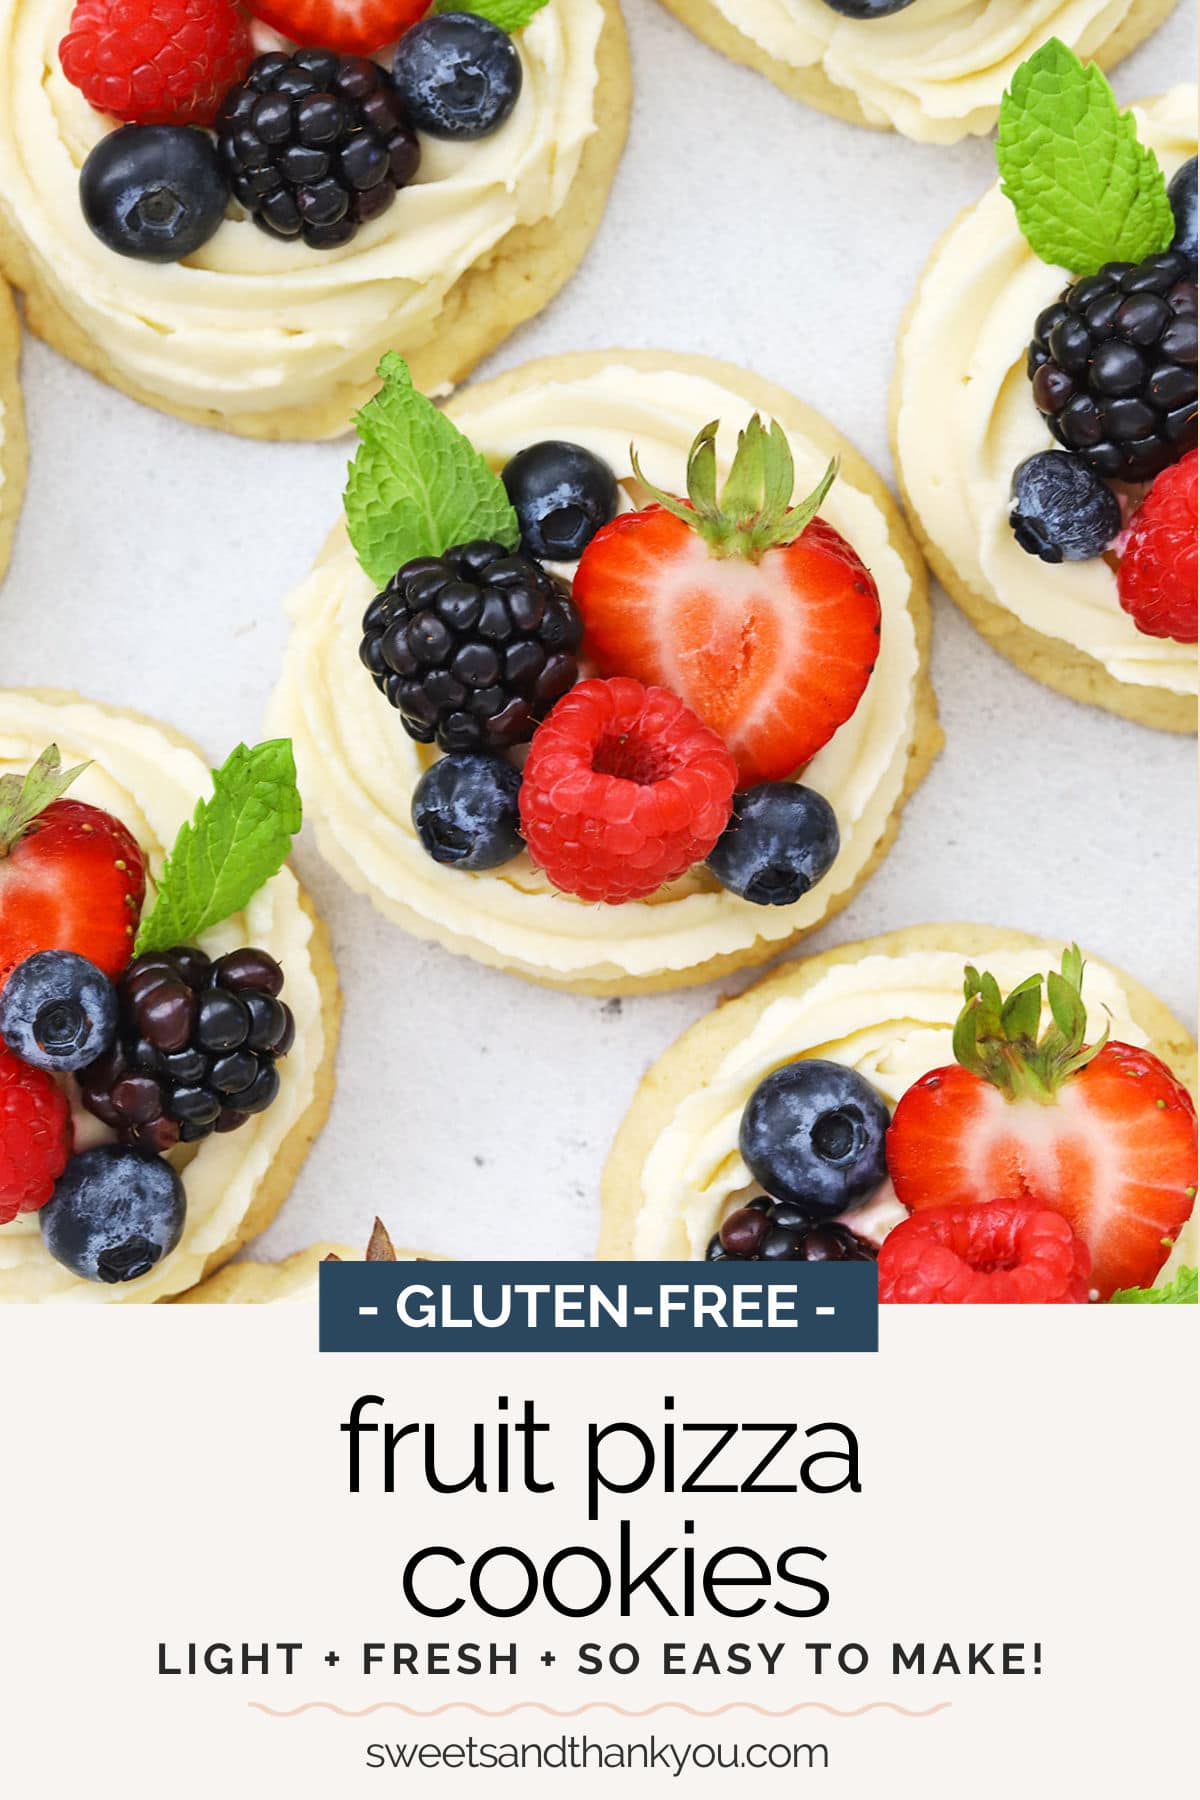 Mini Fruit Pizza Cookies - These mini gluten-free fruit pizzas are made from gluten-Free lemon sugar cookies, a light cream cheese frosting, and fresh berries. They're beautiful and easy! // Gluten-Free Fruit Pizza // Mini Fruit Pizzas // Fruit pizza cookie recipe // Gluten Free lemon cookies #glutenfree #fruitpizza #glutenfreecookies #cookies #lemoncookies